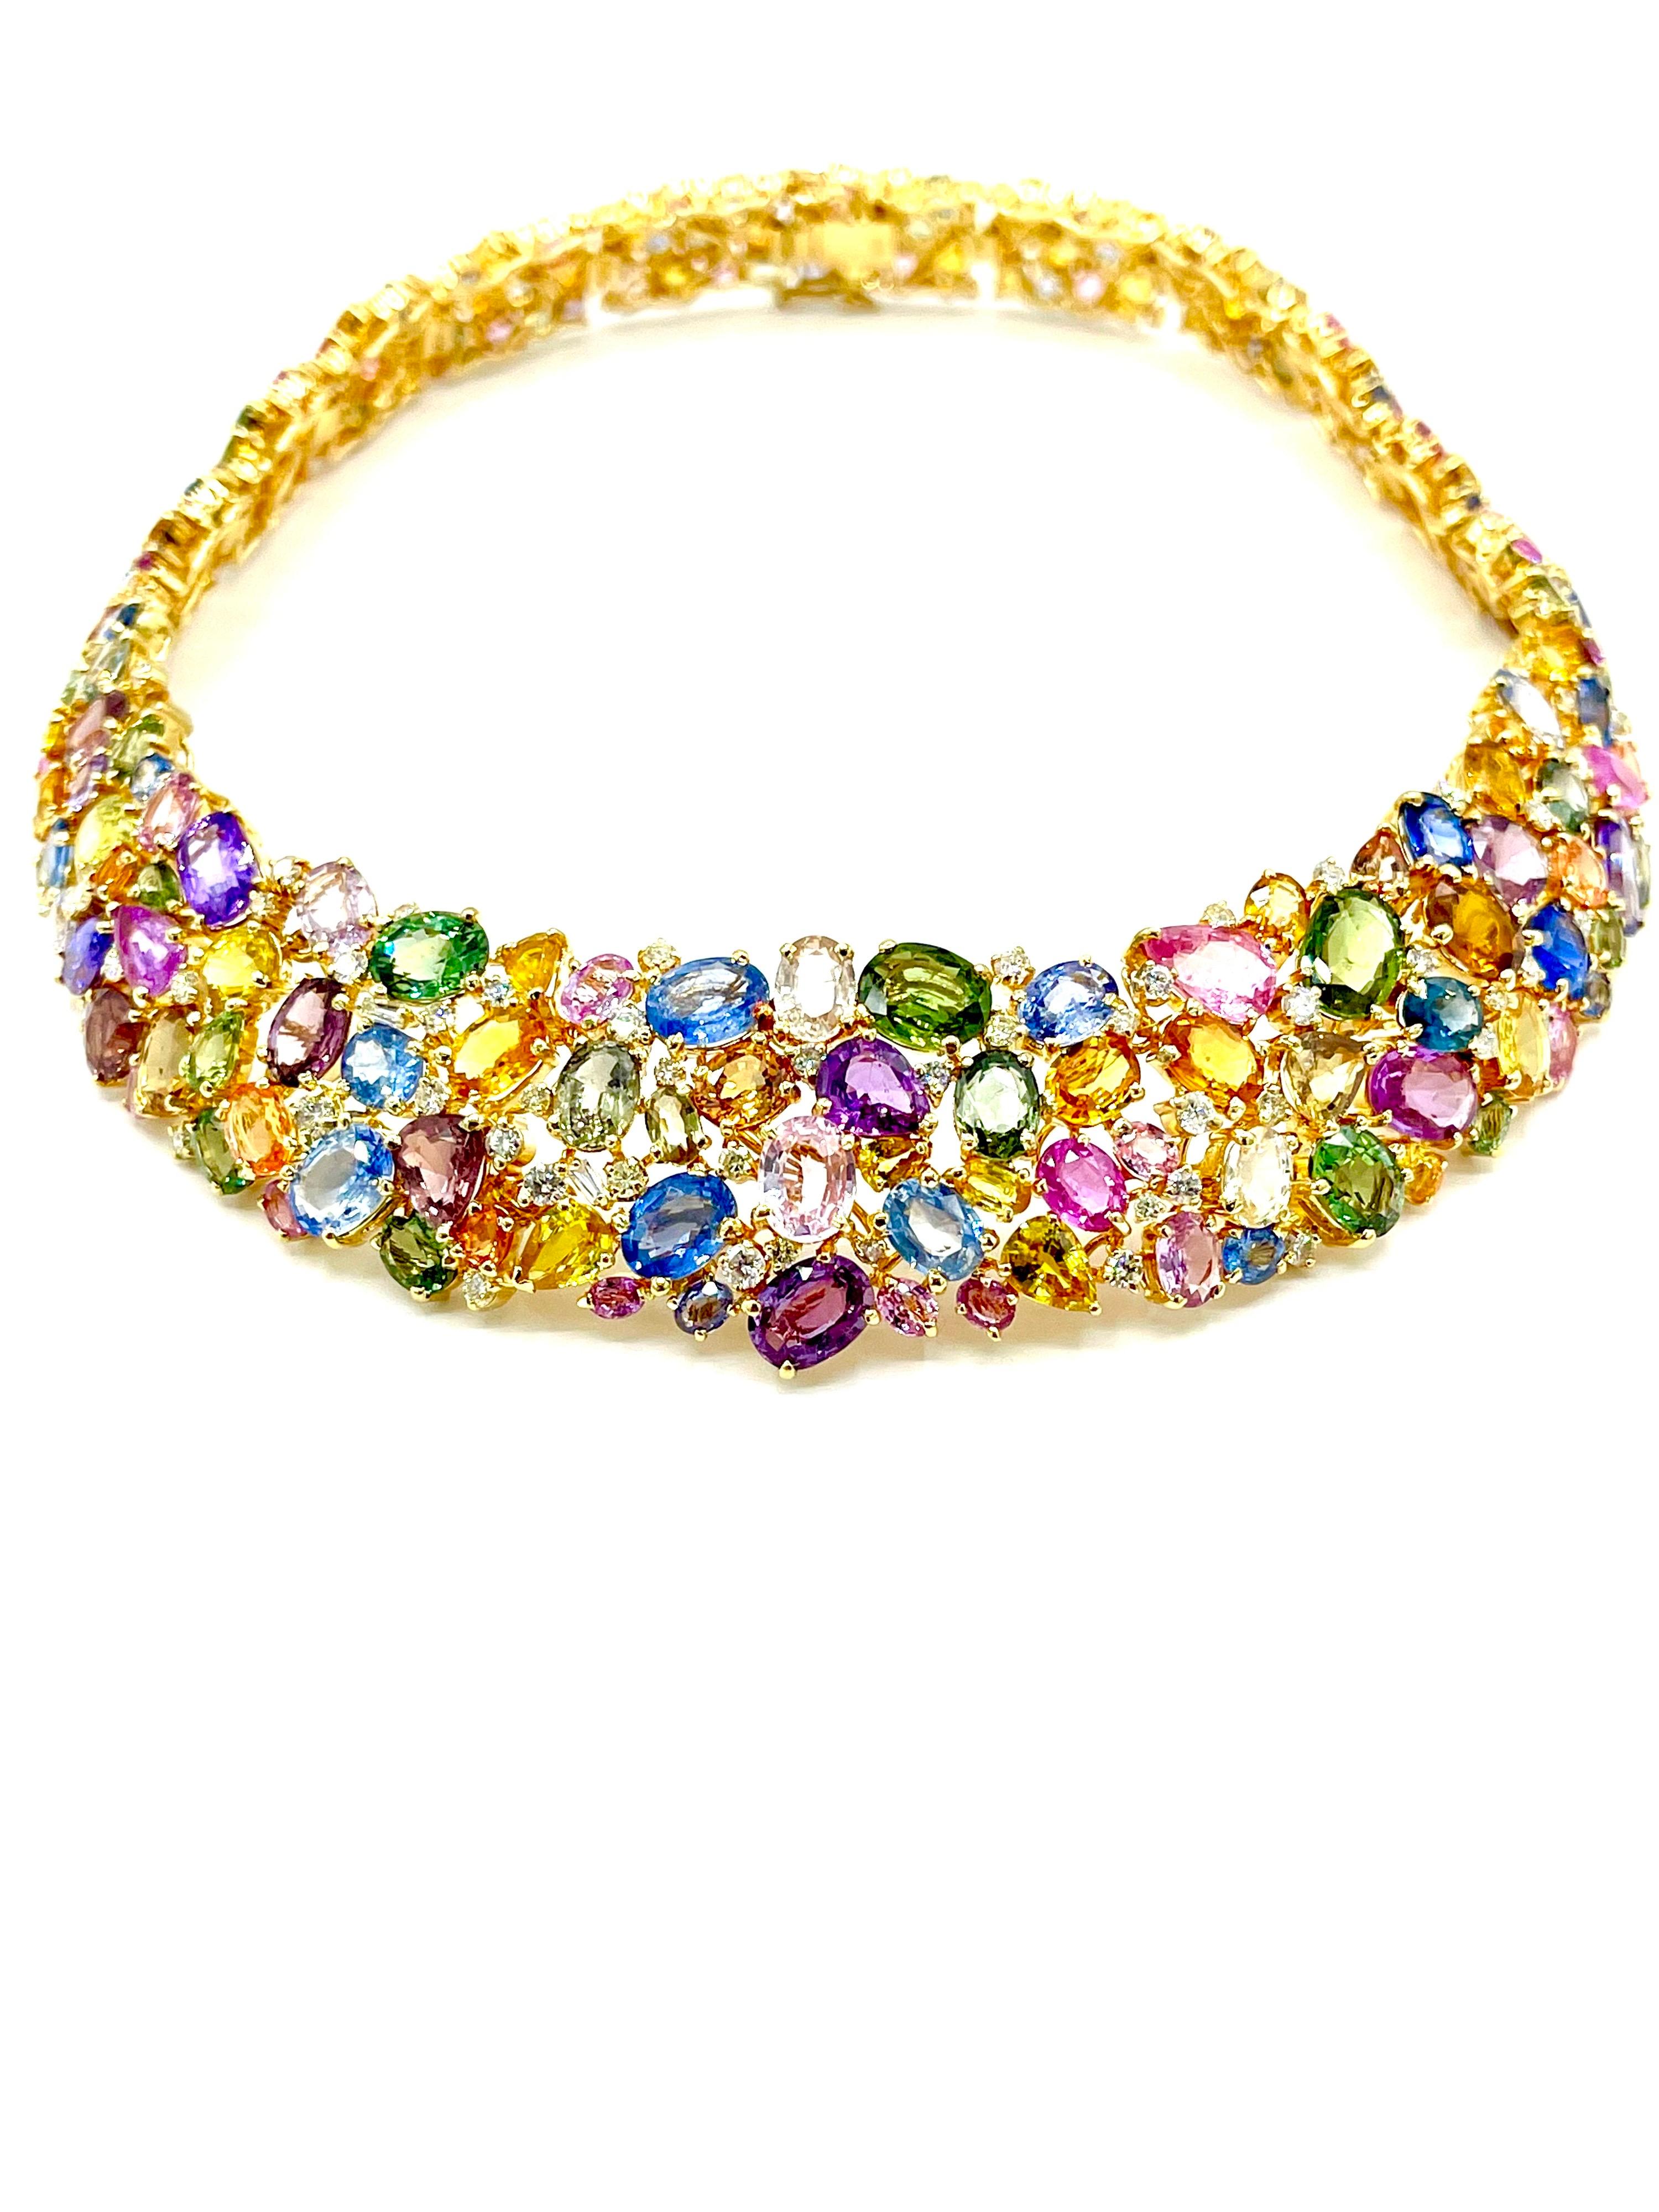 This necklace is a show stopper!  There are a total of 255 multi color Natural Sapphires of various shapes and sizes, set with 111 round brilliant white Diamonds in 18K yellow gold.  It is a masterpiece of craftsmanship.  The Sapphires range in